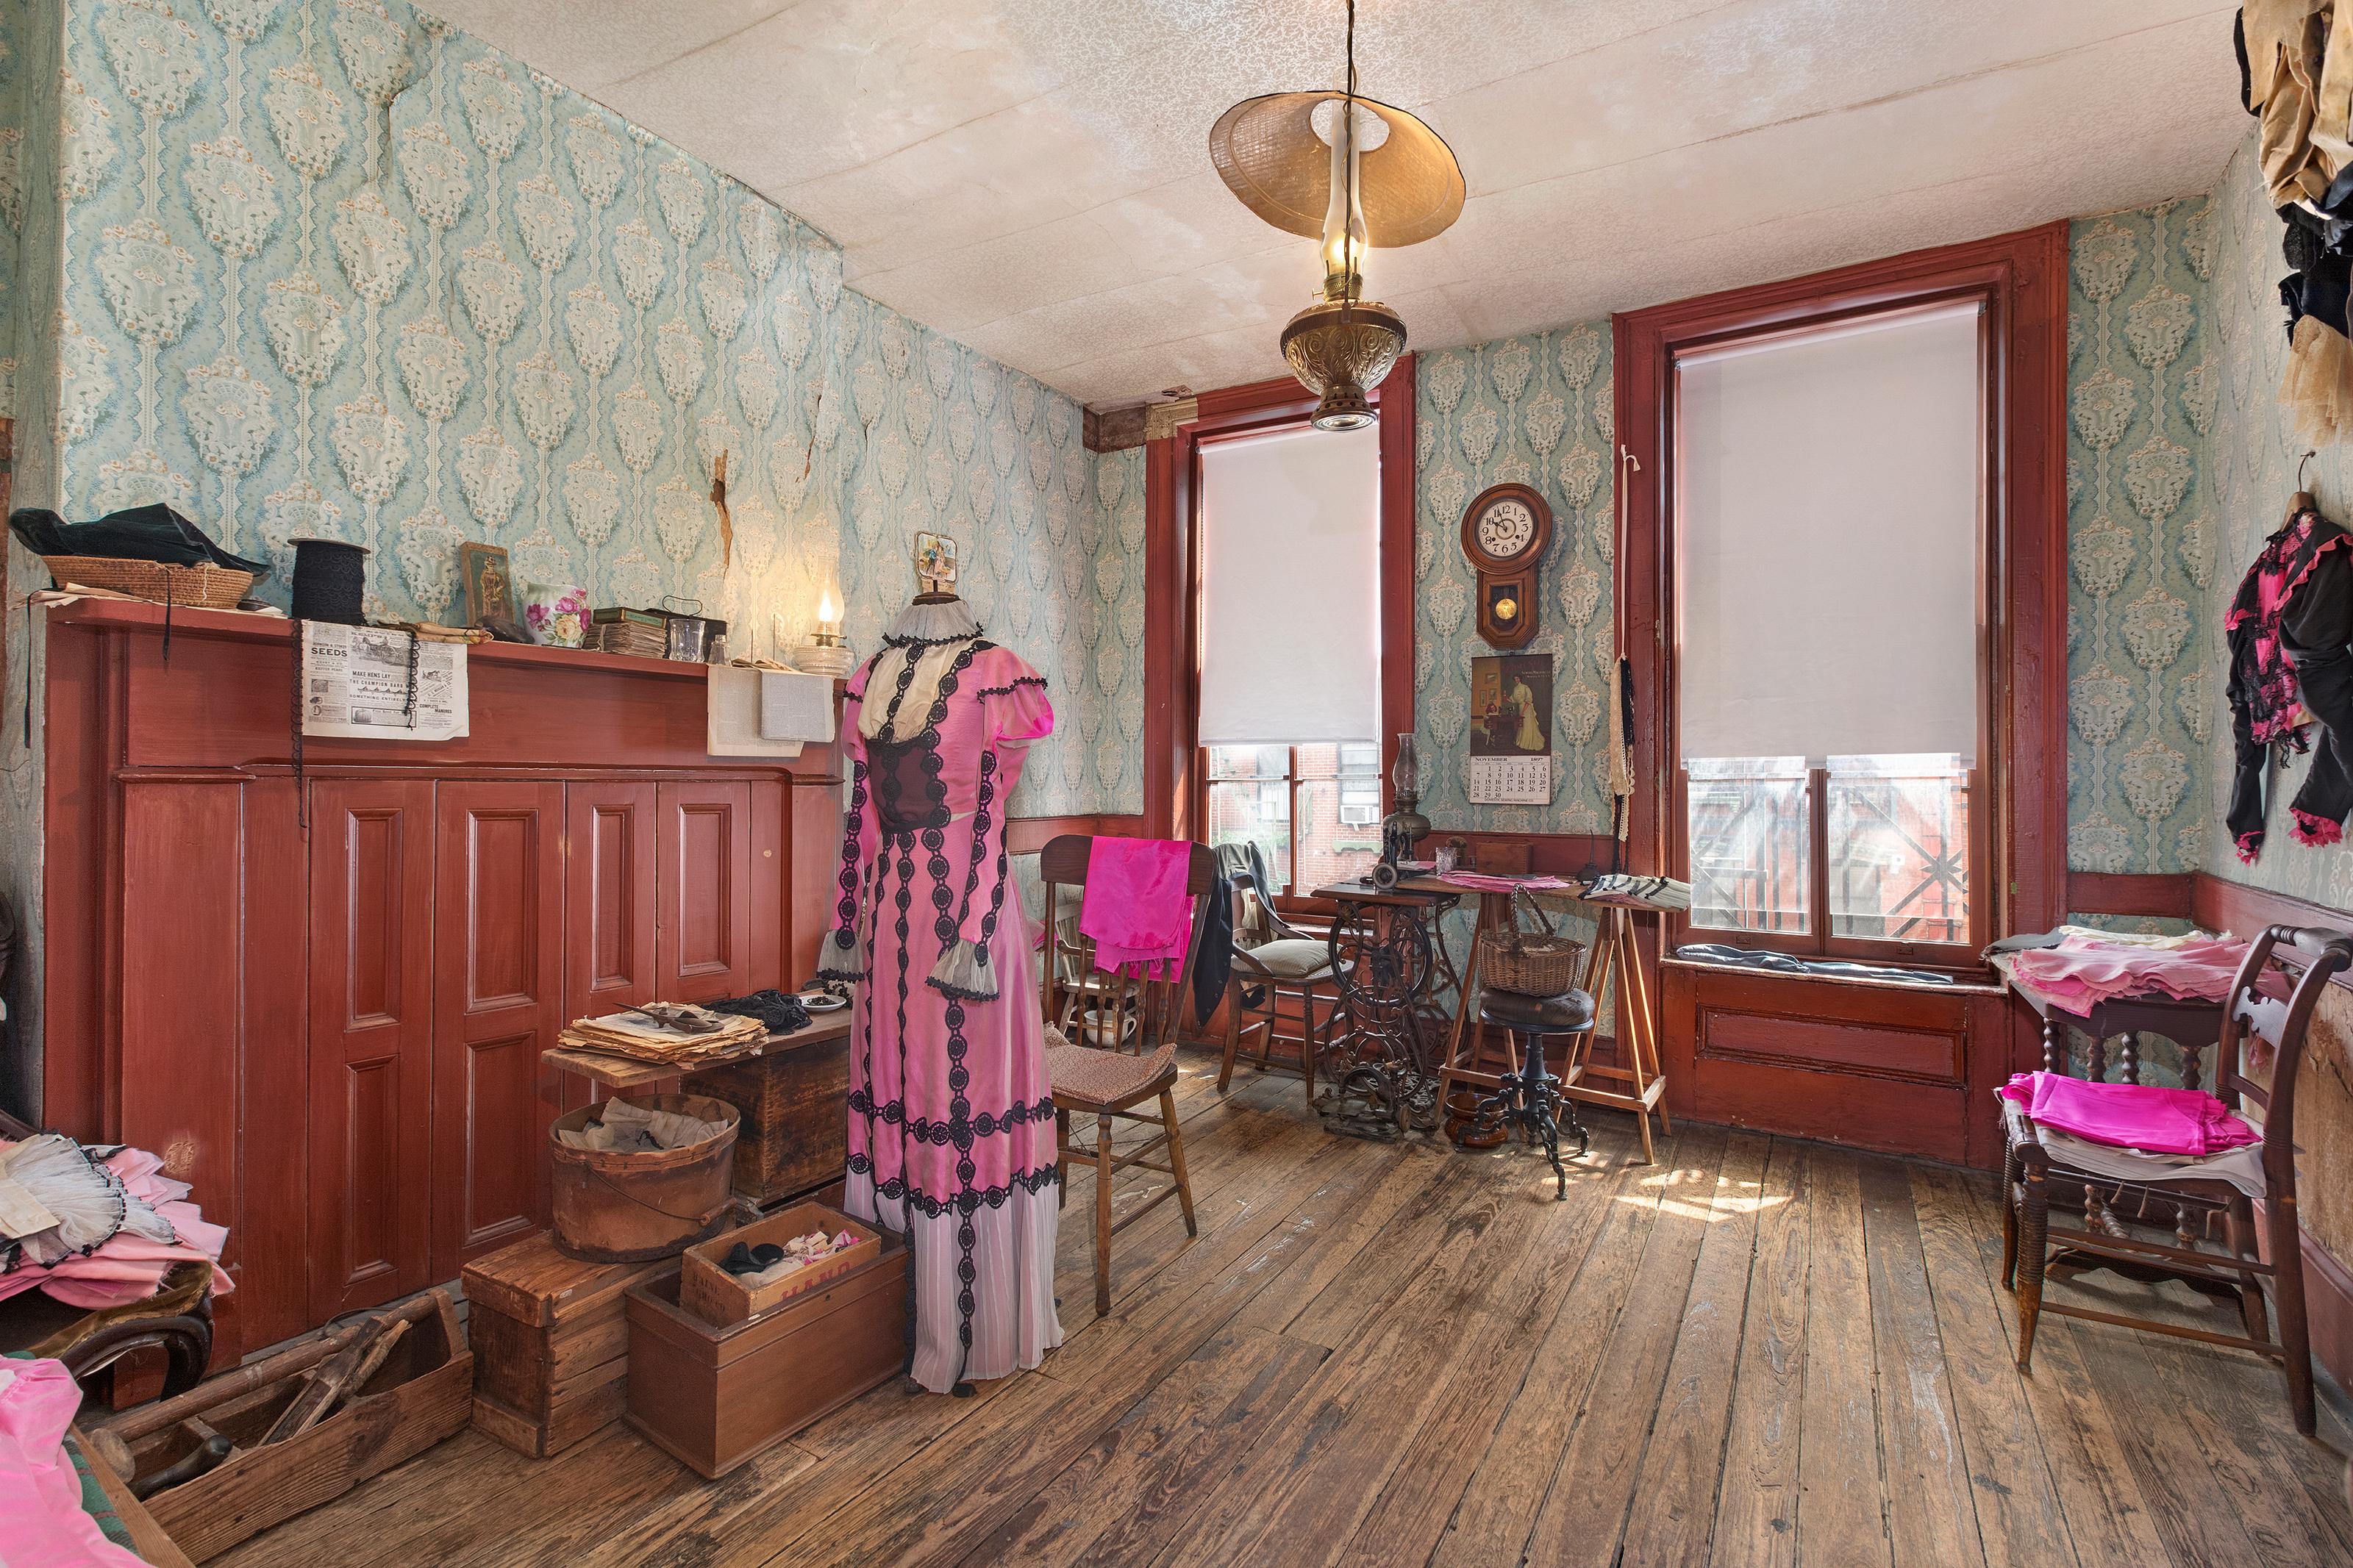 A room with wooden floors, blue wall paper, two windows, some furniture and a dress hanging.